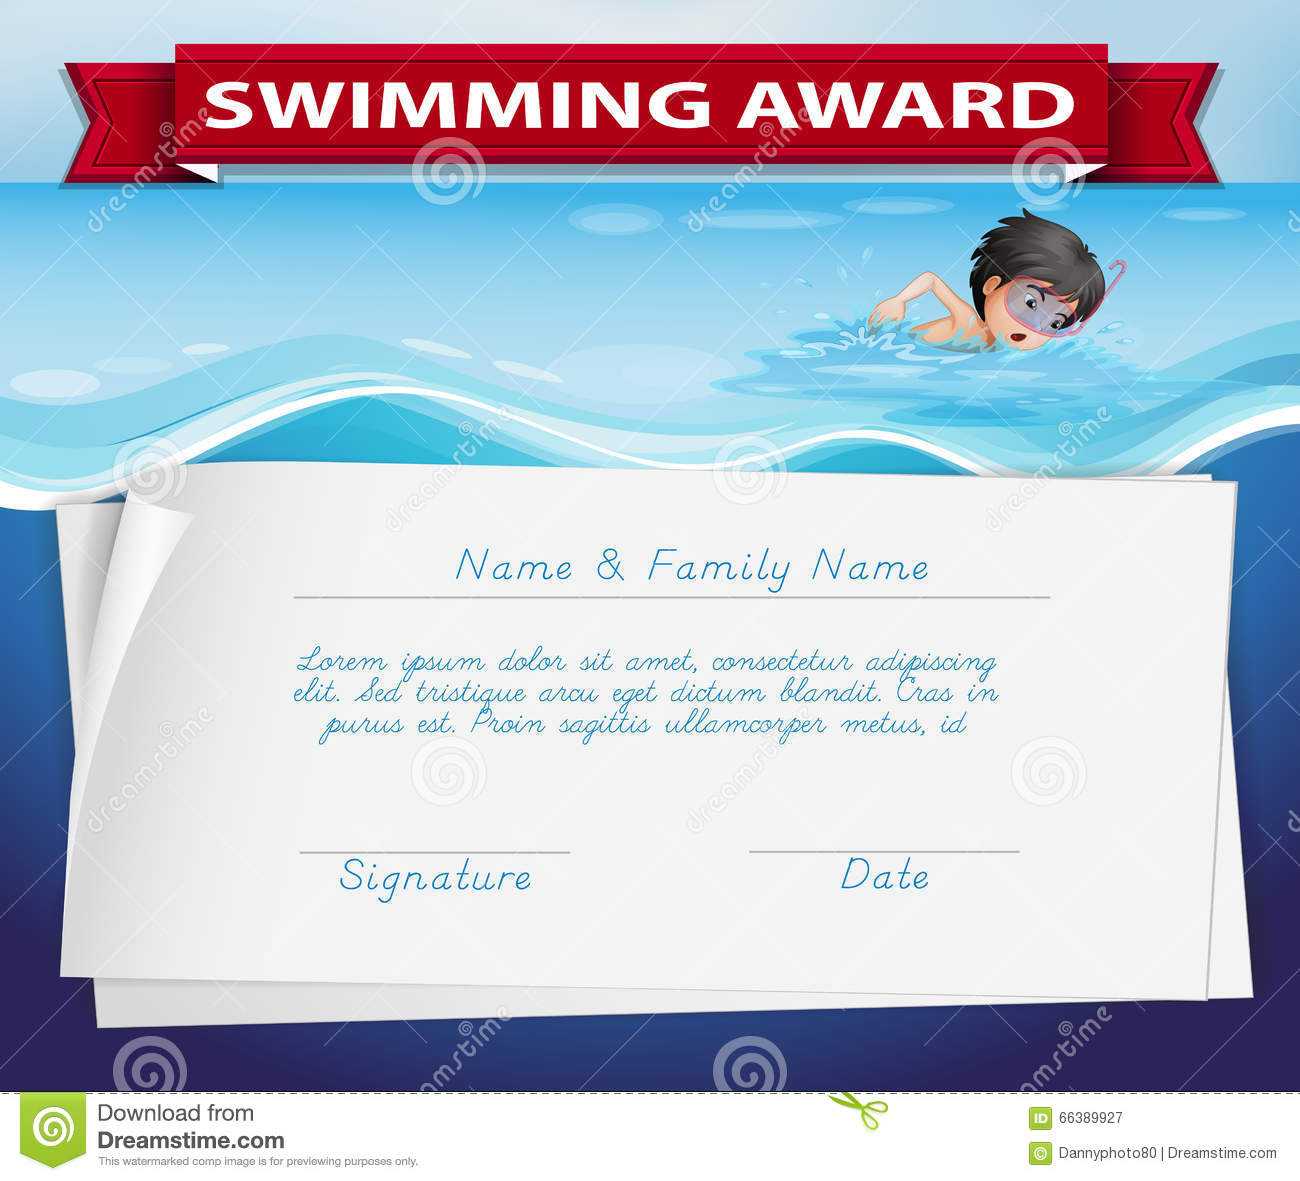 Certificate Templates For Swimming Awards Printable Award In Swimming Certificate Templates Free